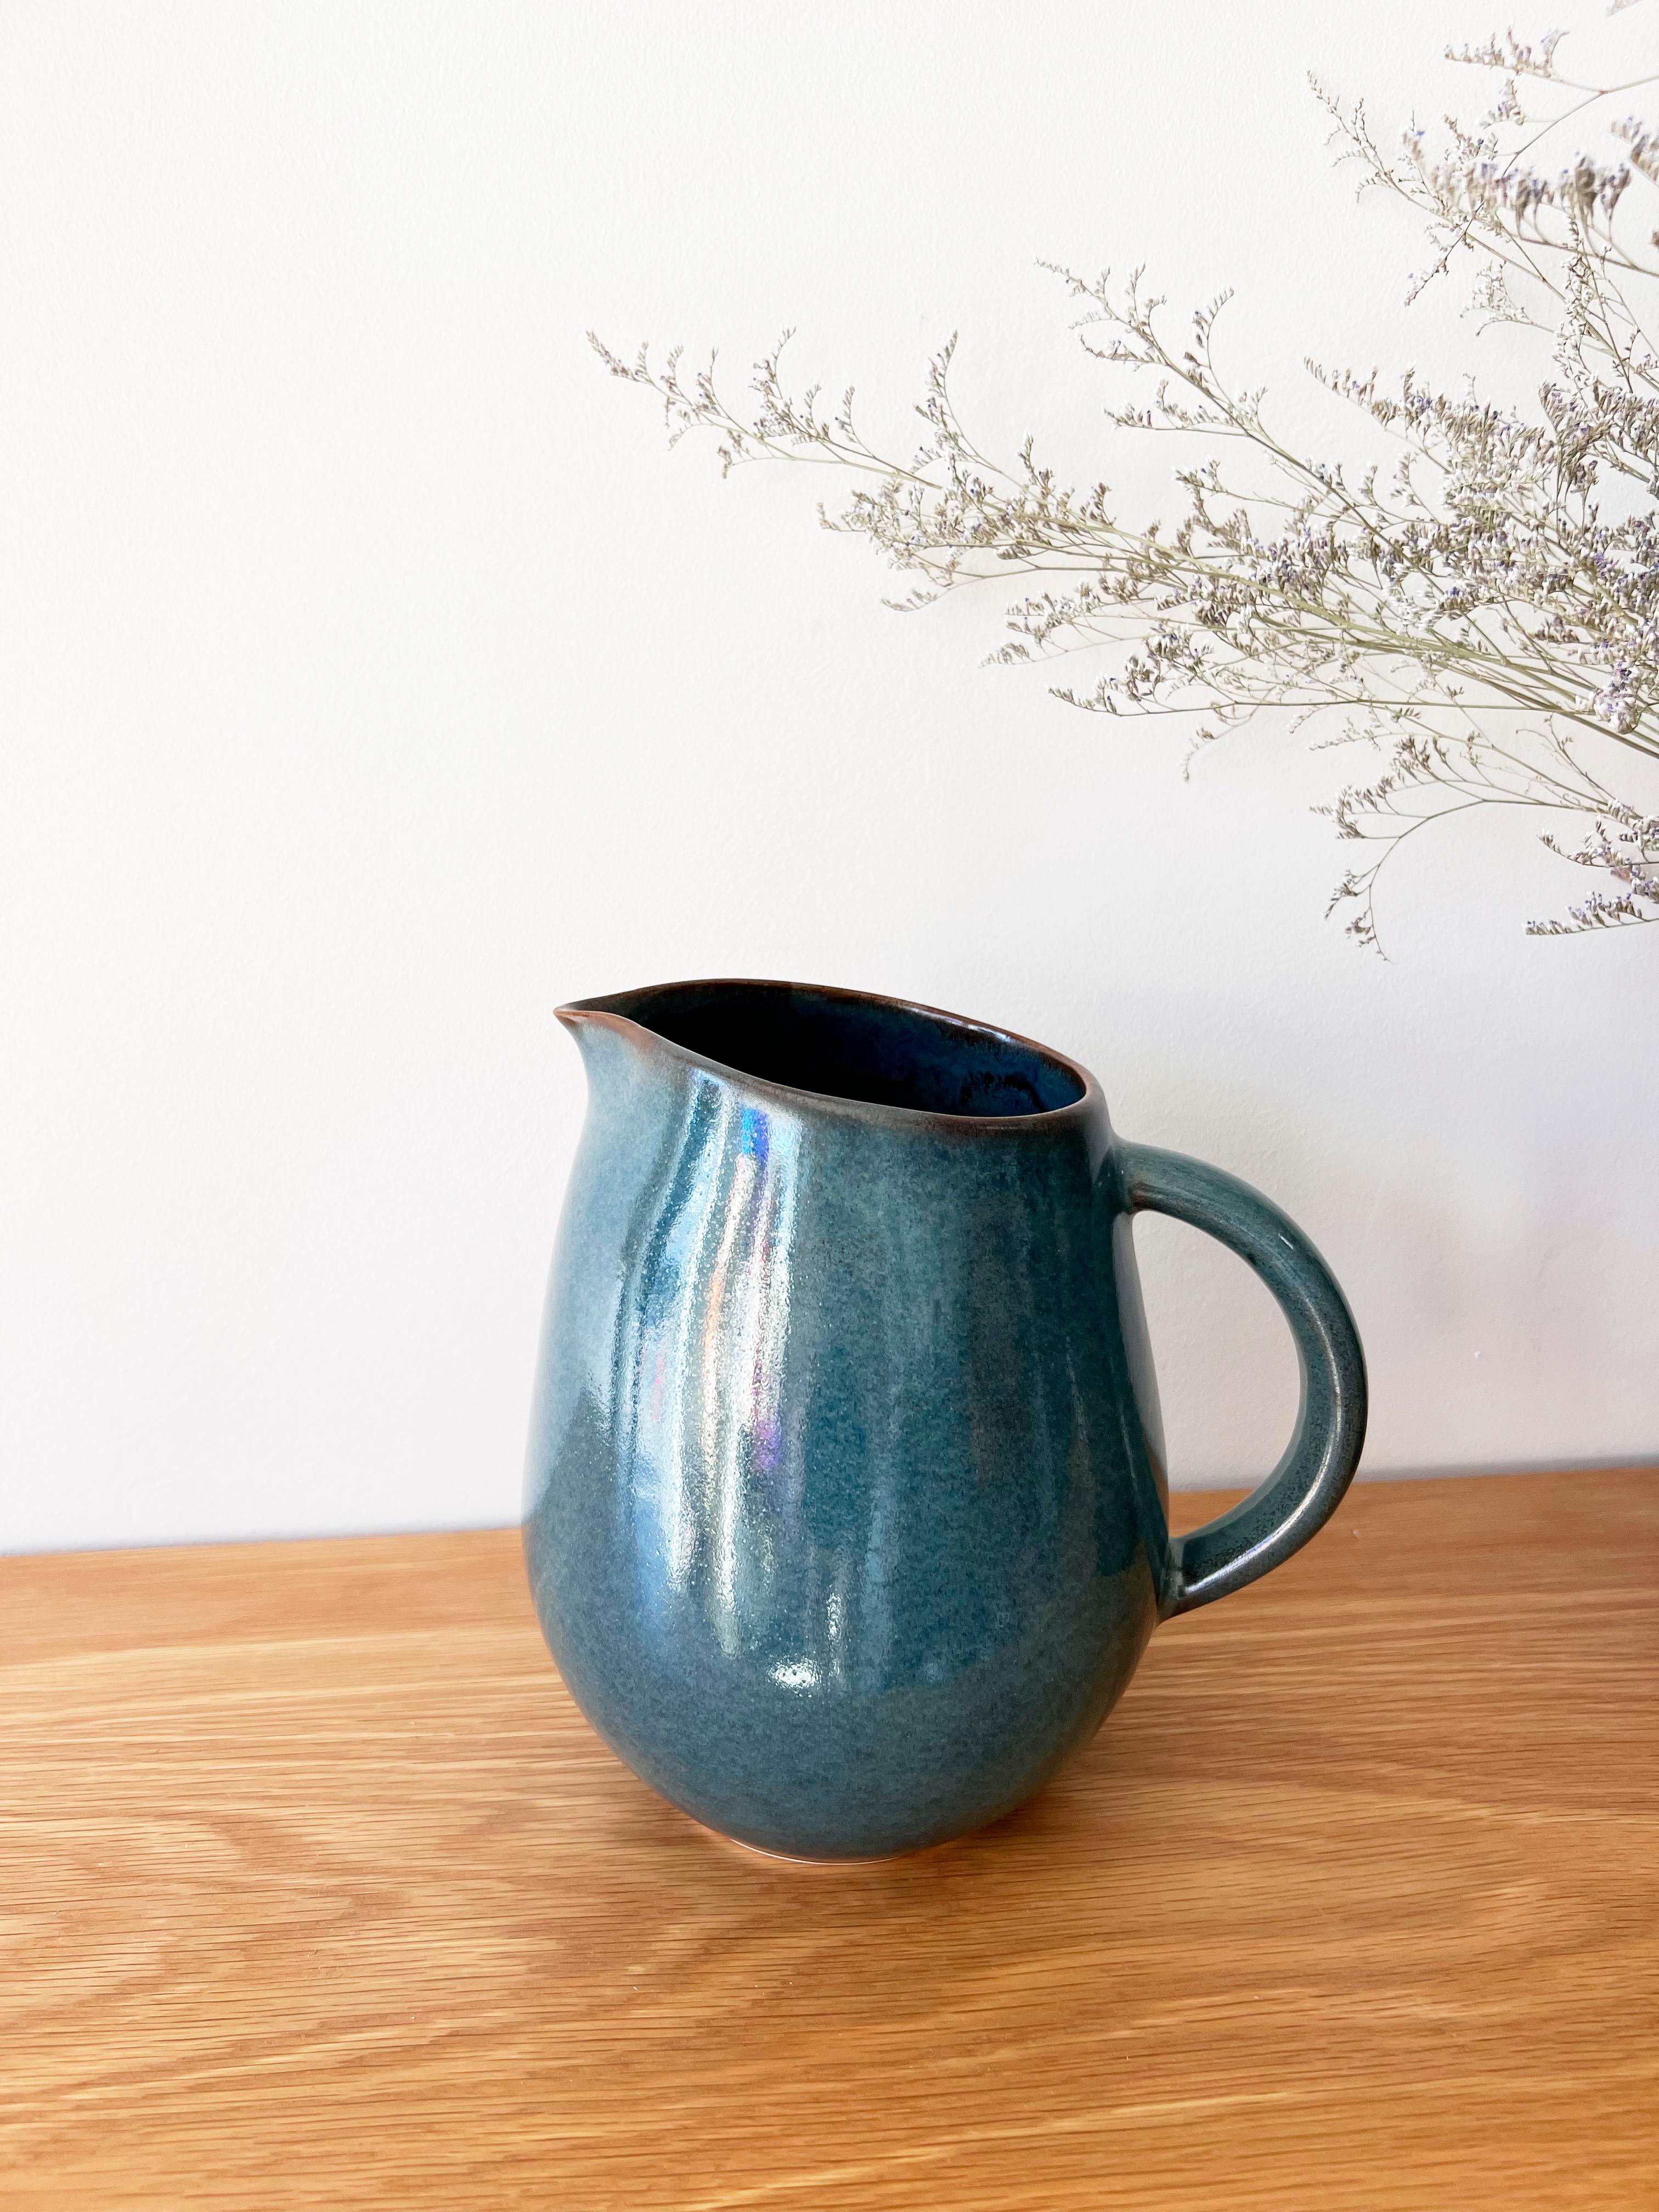 Blue glazed ceramic pitcher.

Drinks taste better when served in a beautiful vessel that has been handmade and hand glazed by artisans. Artisan made ceramics are durable and made from natural materials and can add a touch of organic modern